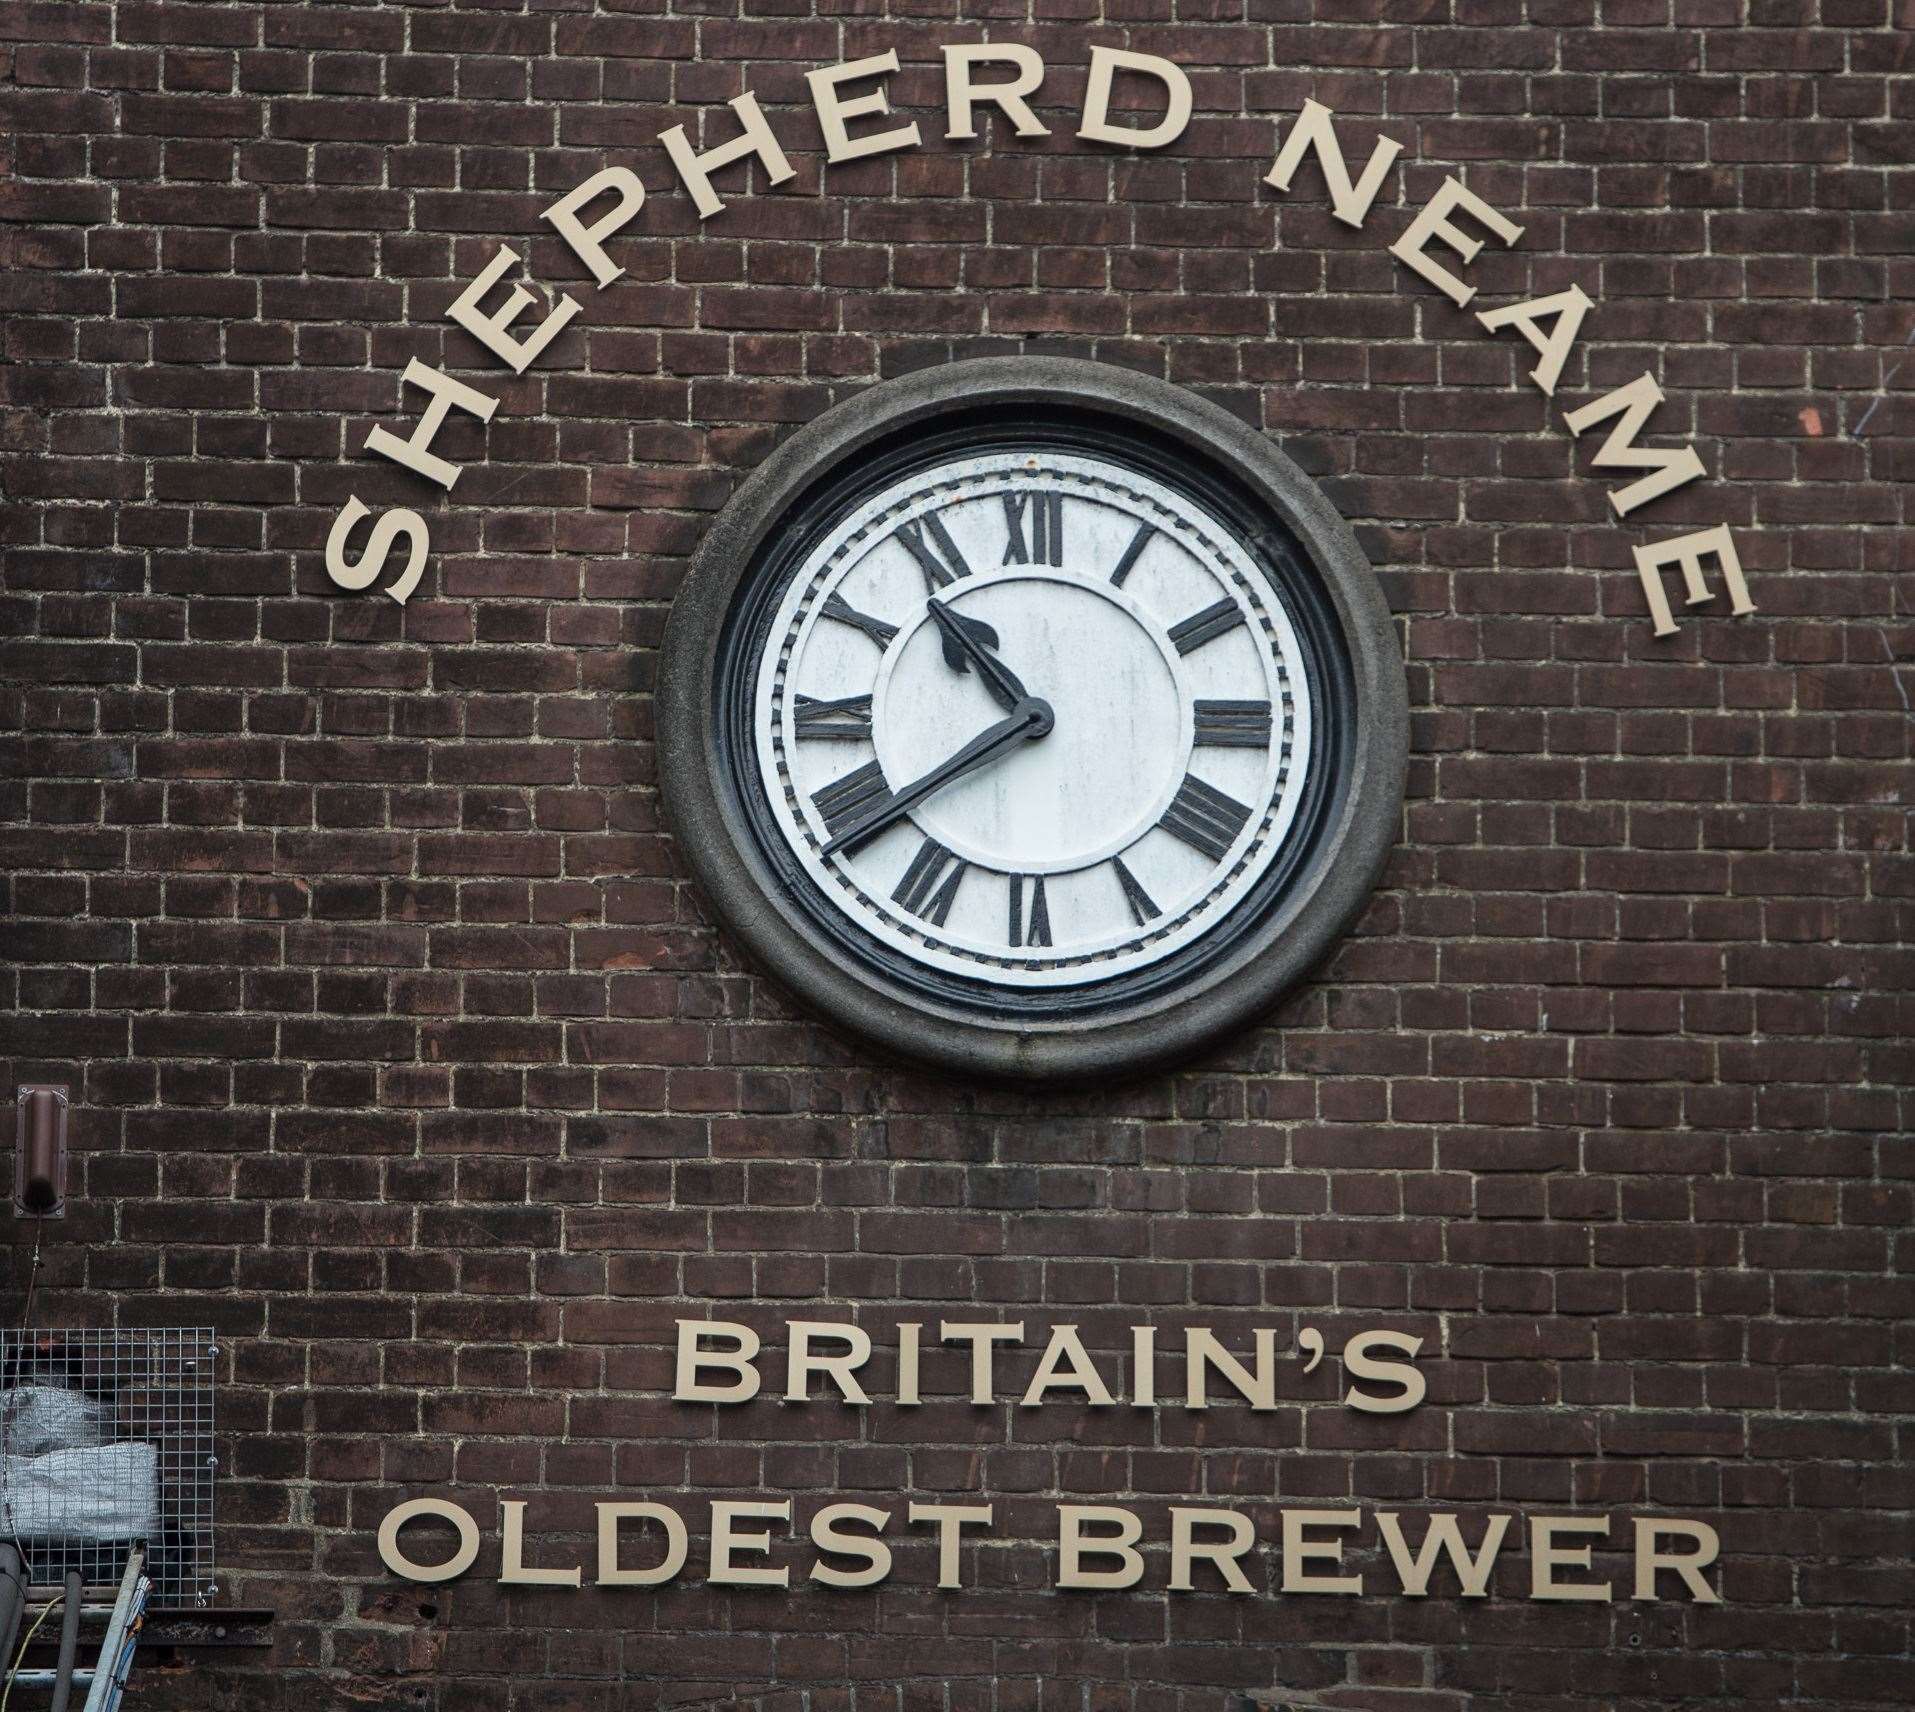 Shepherd Neame has been relying on the water supply for hundreds of years